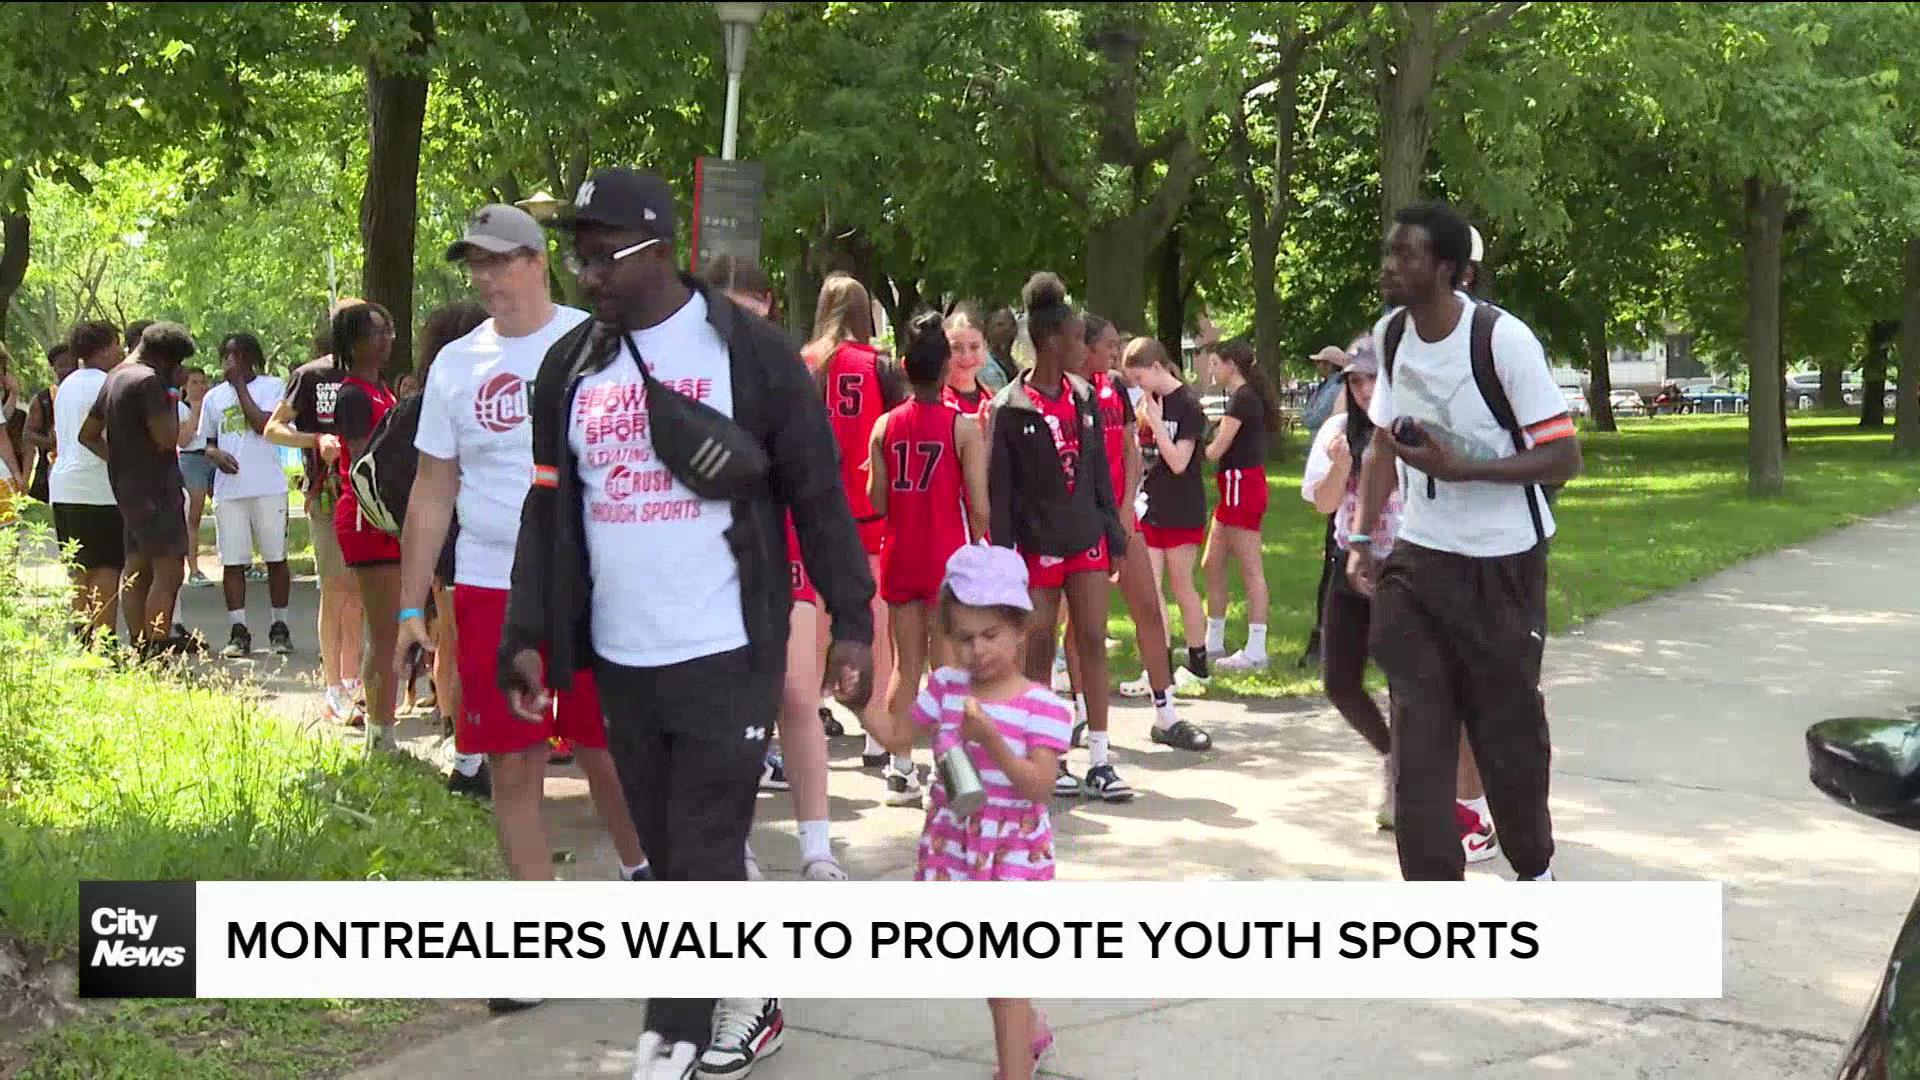 Fundraiser walk-a-thon encourages young Montrealers to do sports